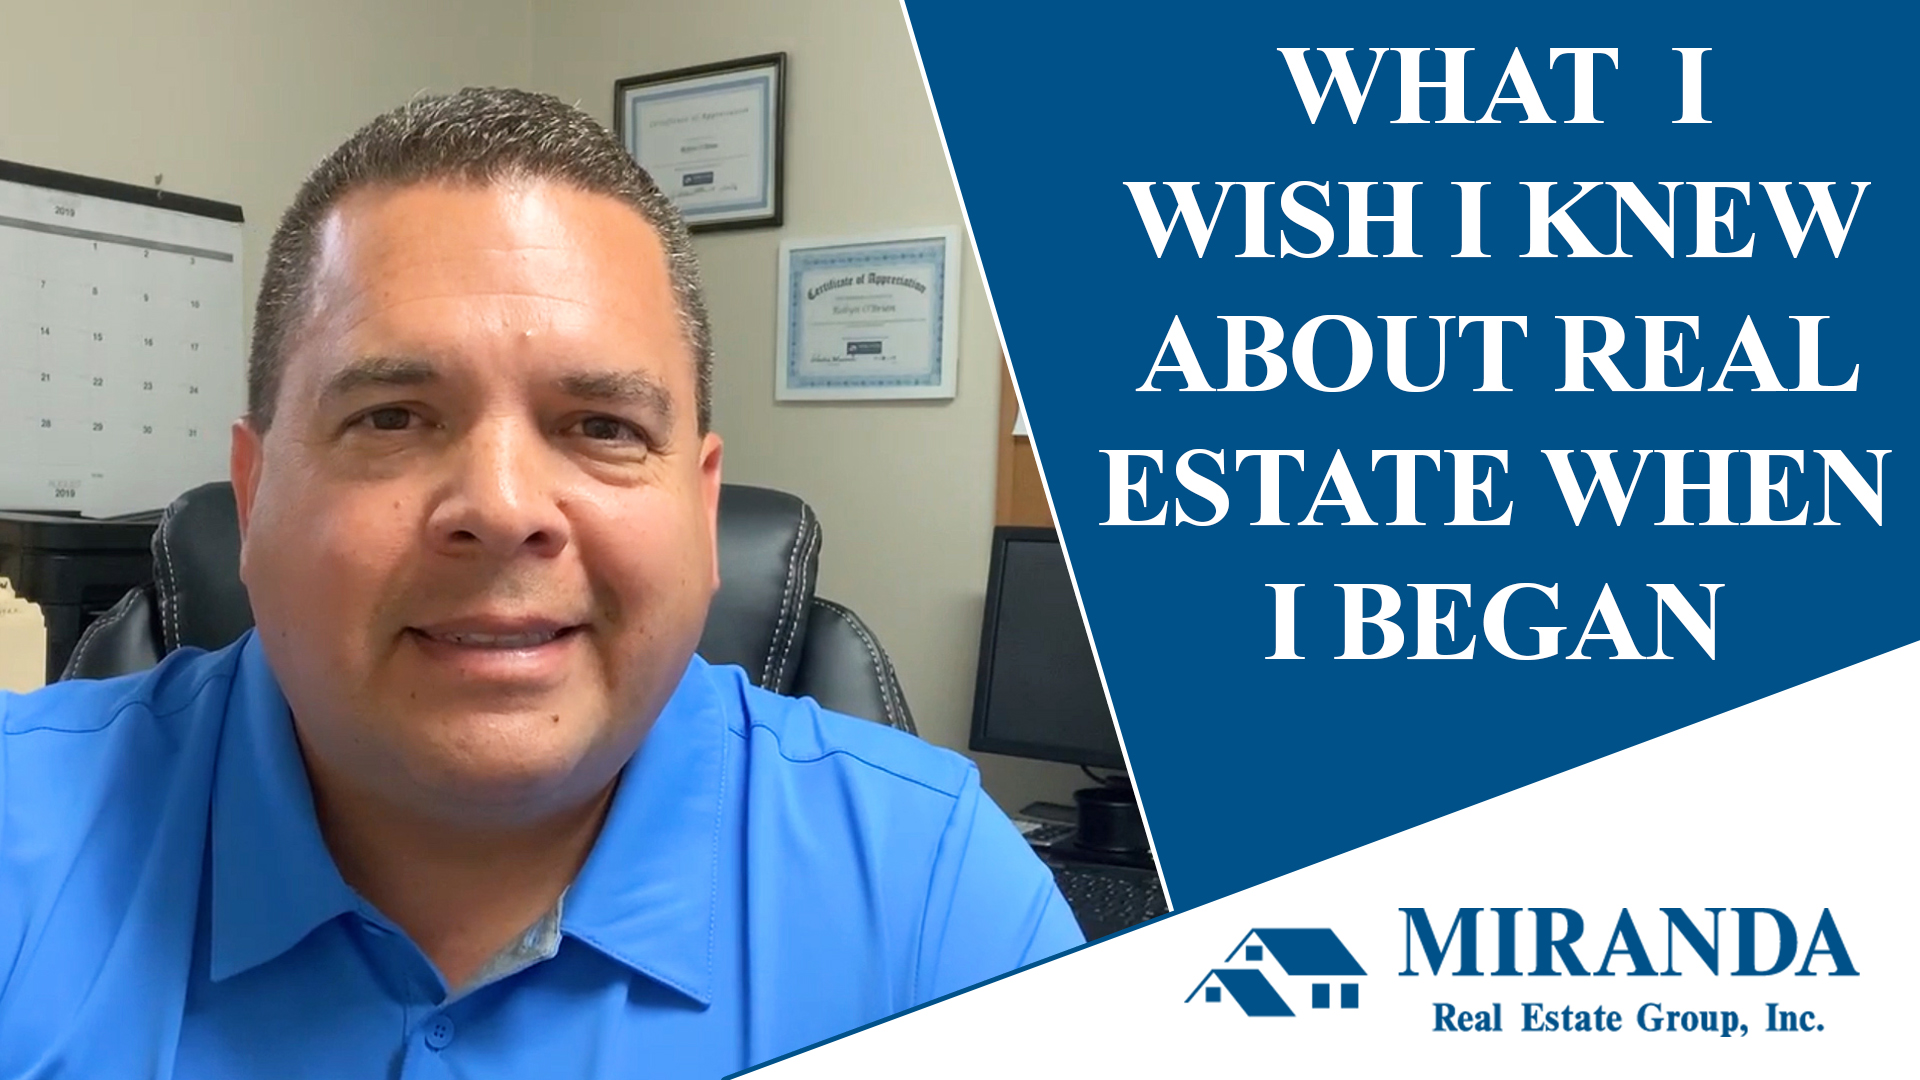 5 Things I Wish I Knew Before Starting My Real Estate Career